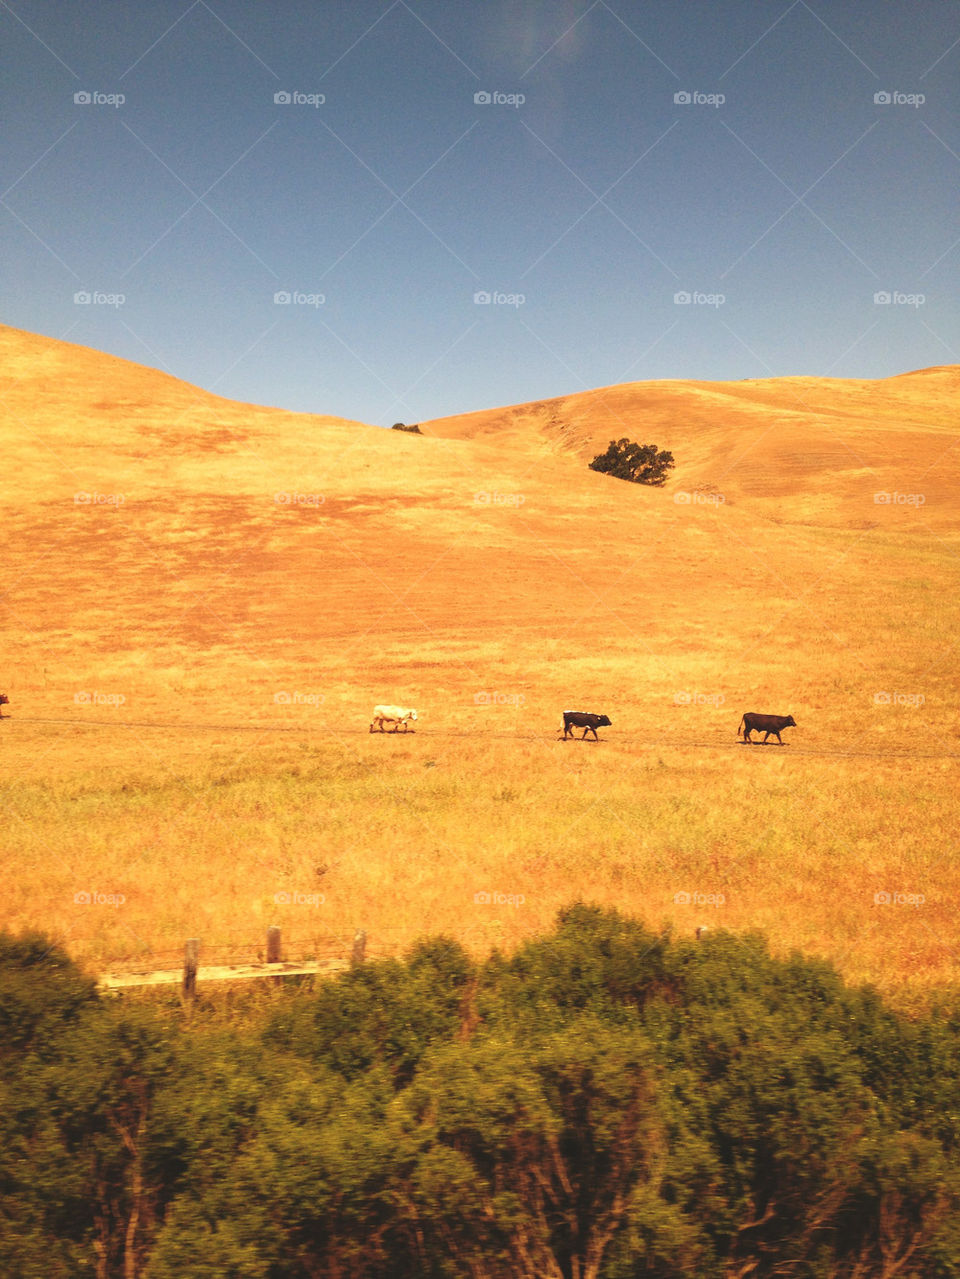 COWS IN YELLOW FIELD